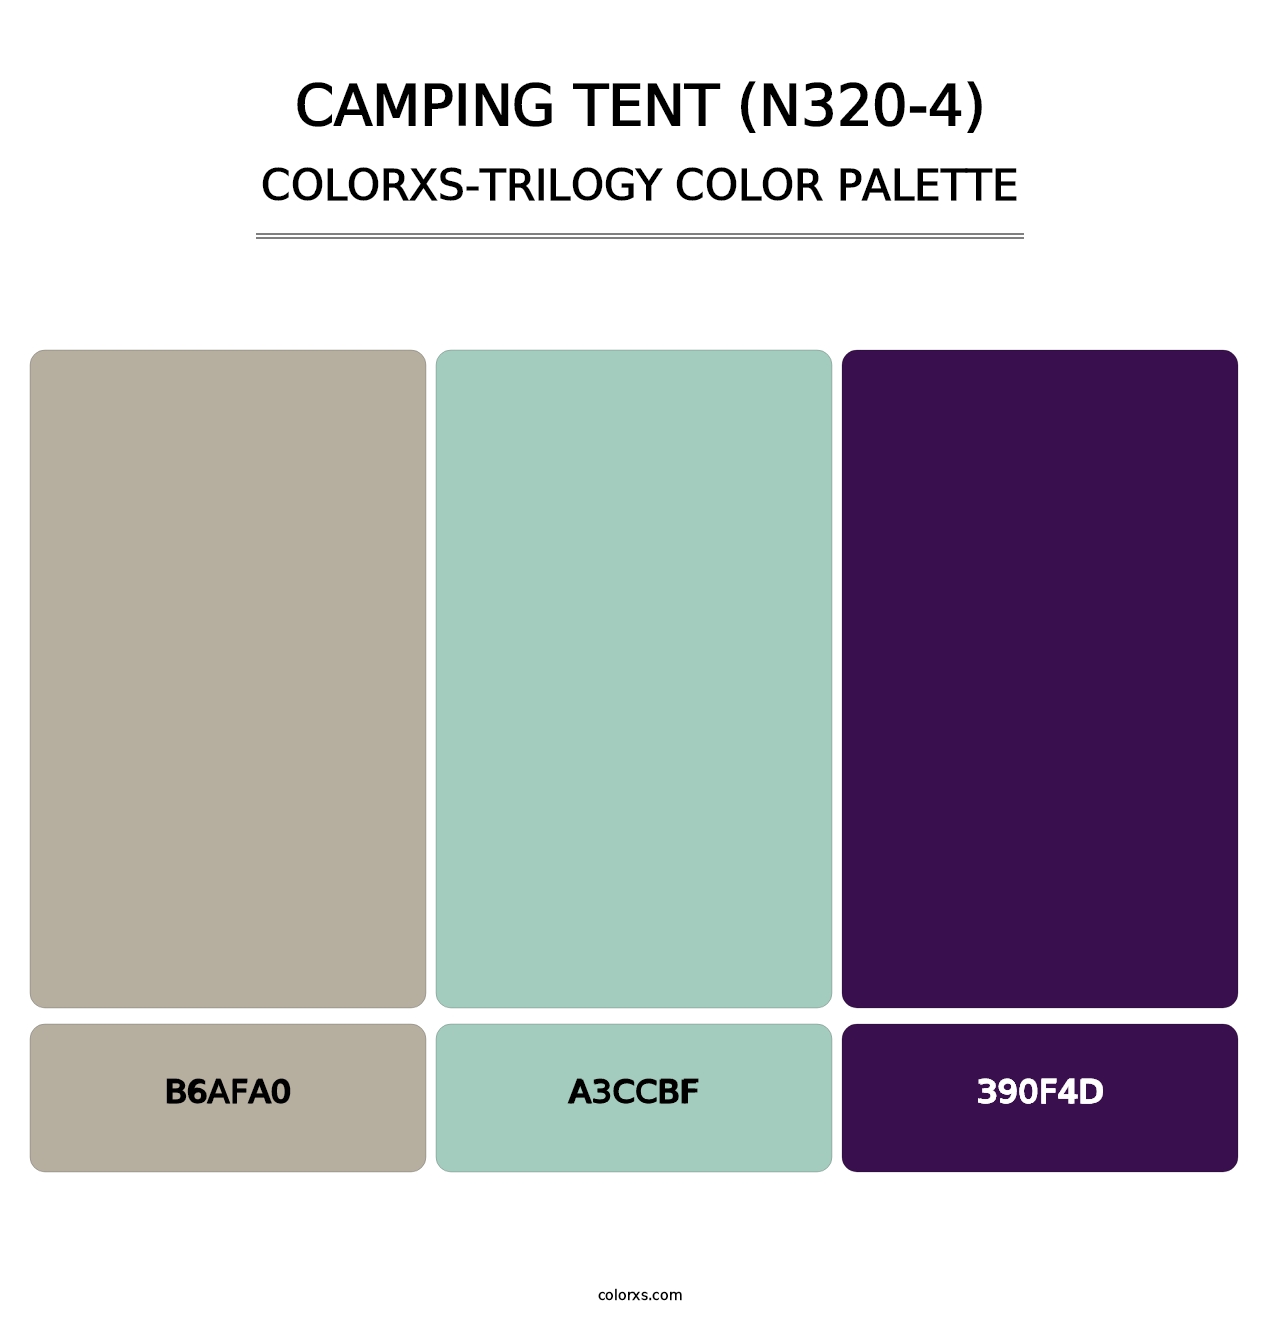 Camping Tent (N320-4) - Colorxs Trilogy Palette